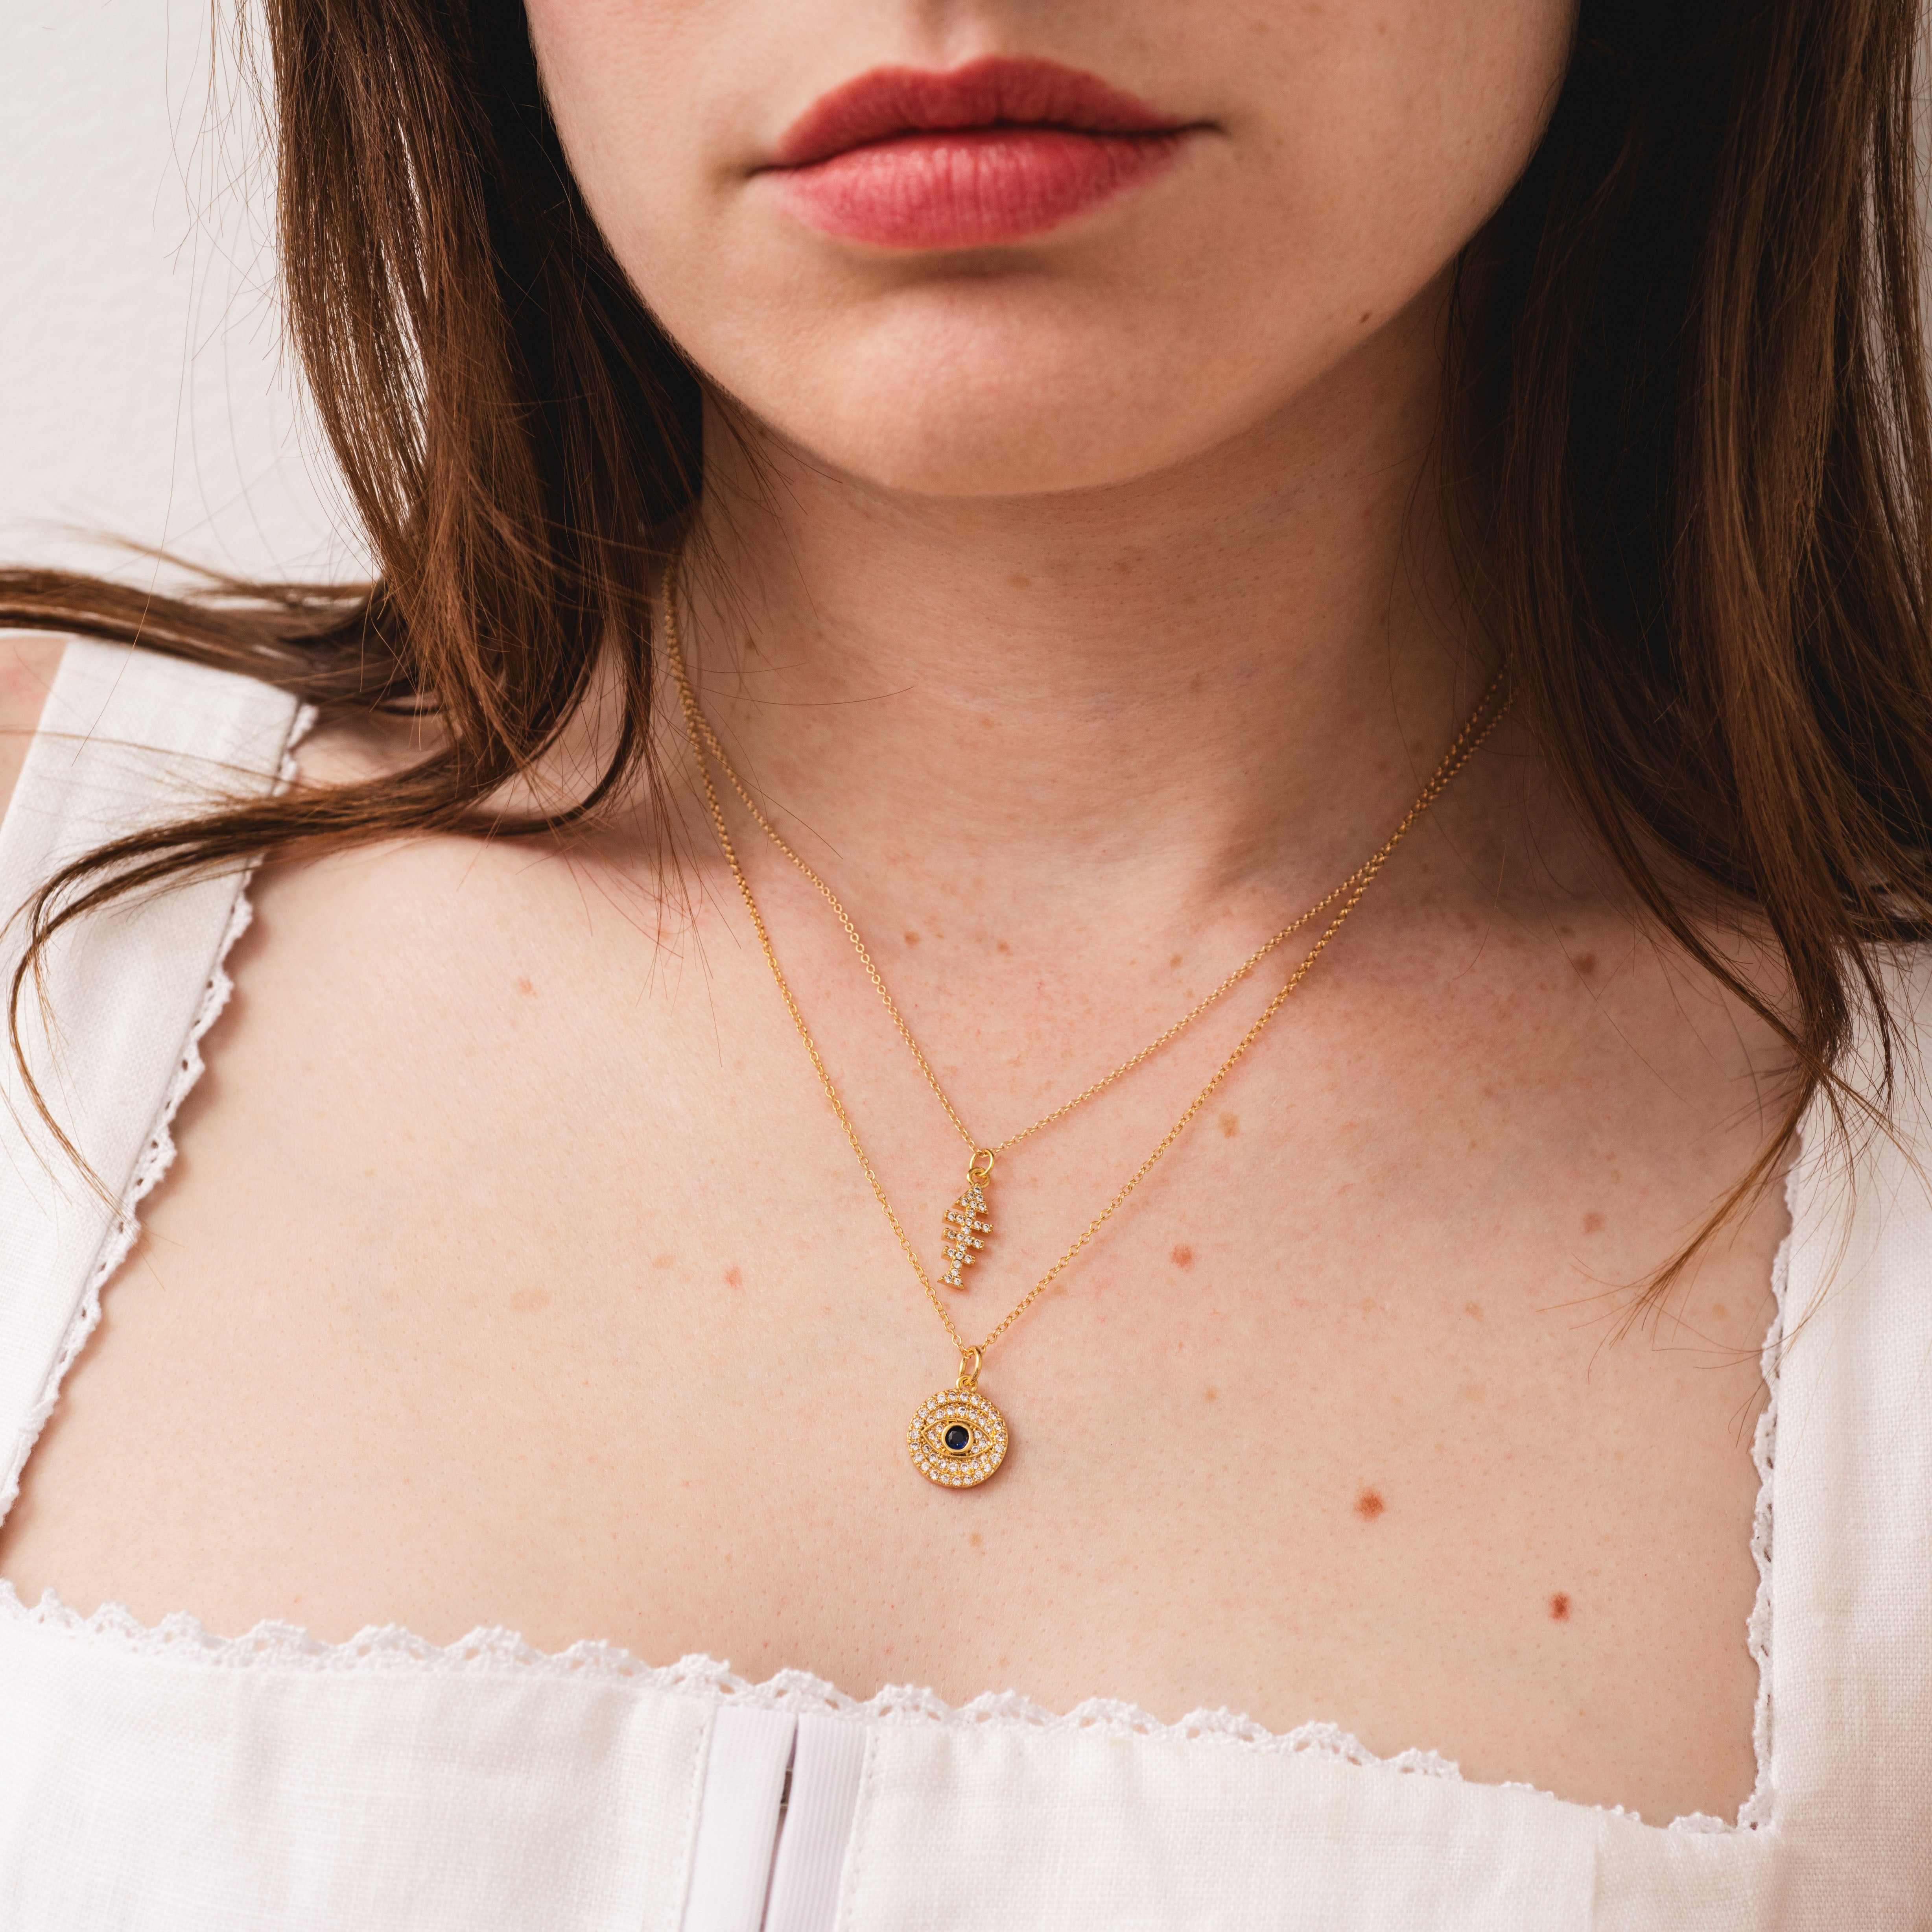 Akela necklace - Necklaces - Our Little Beauties - adepte store